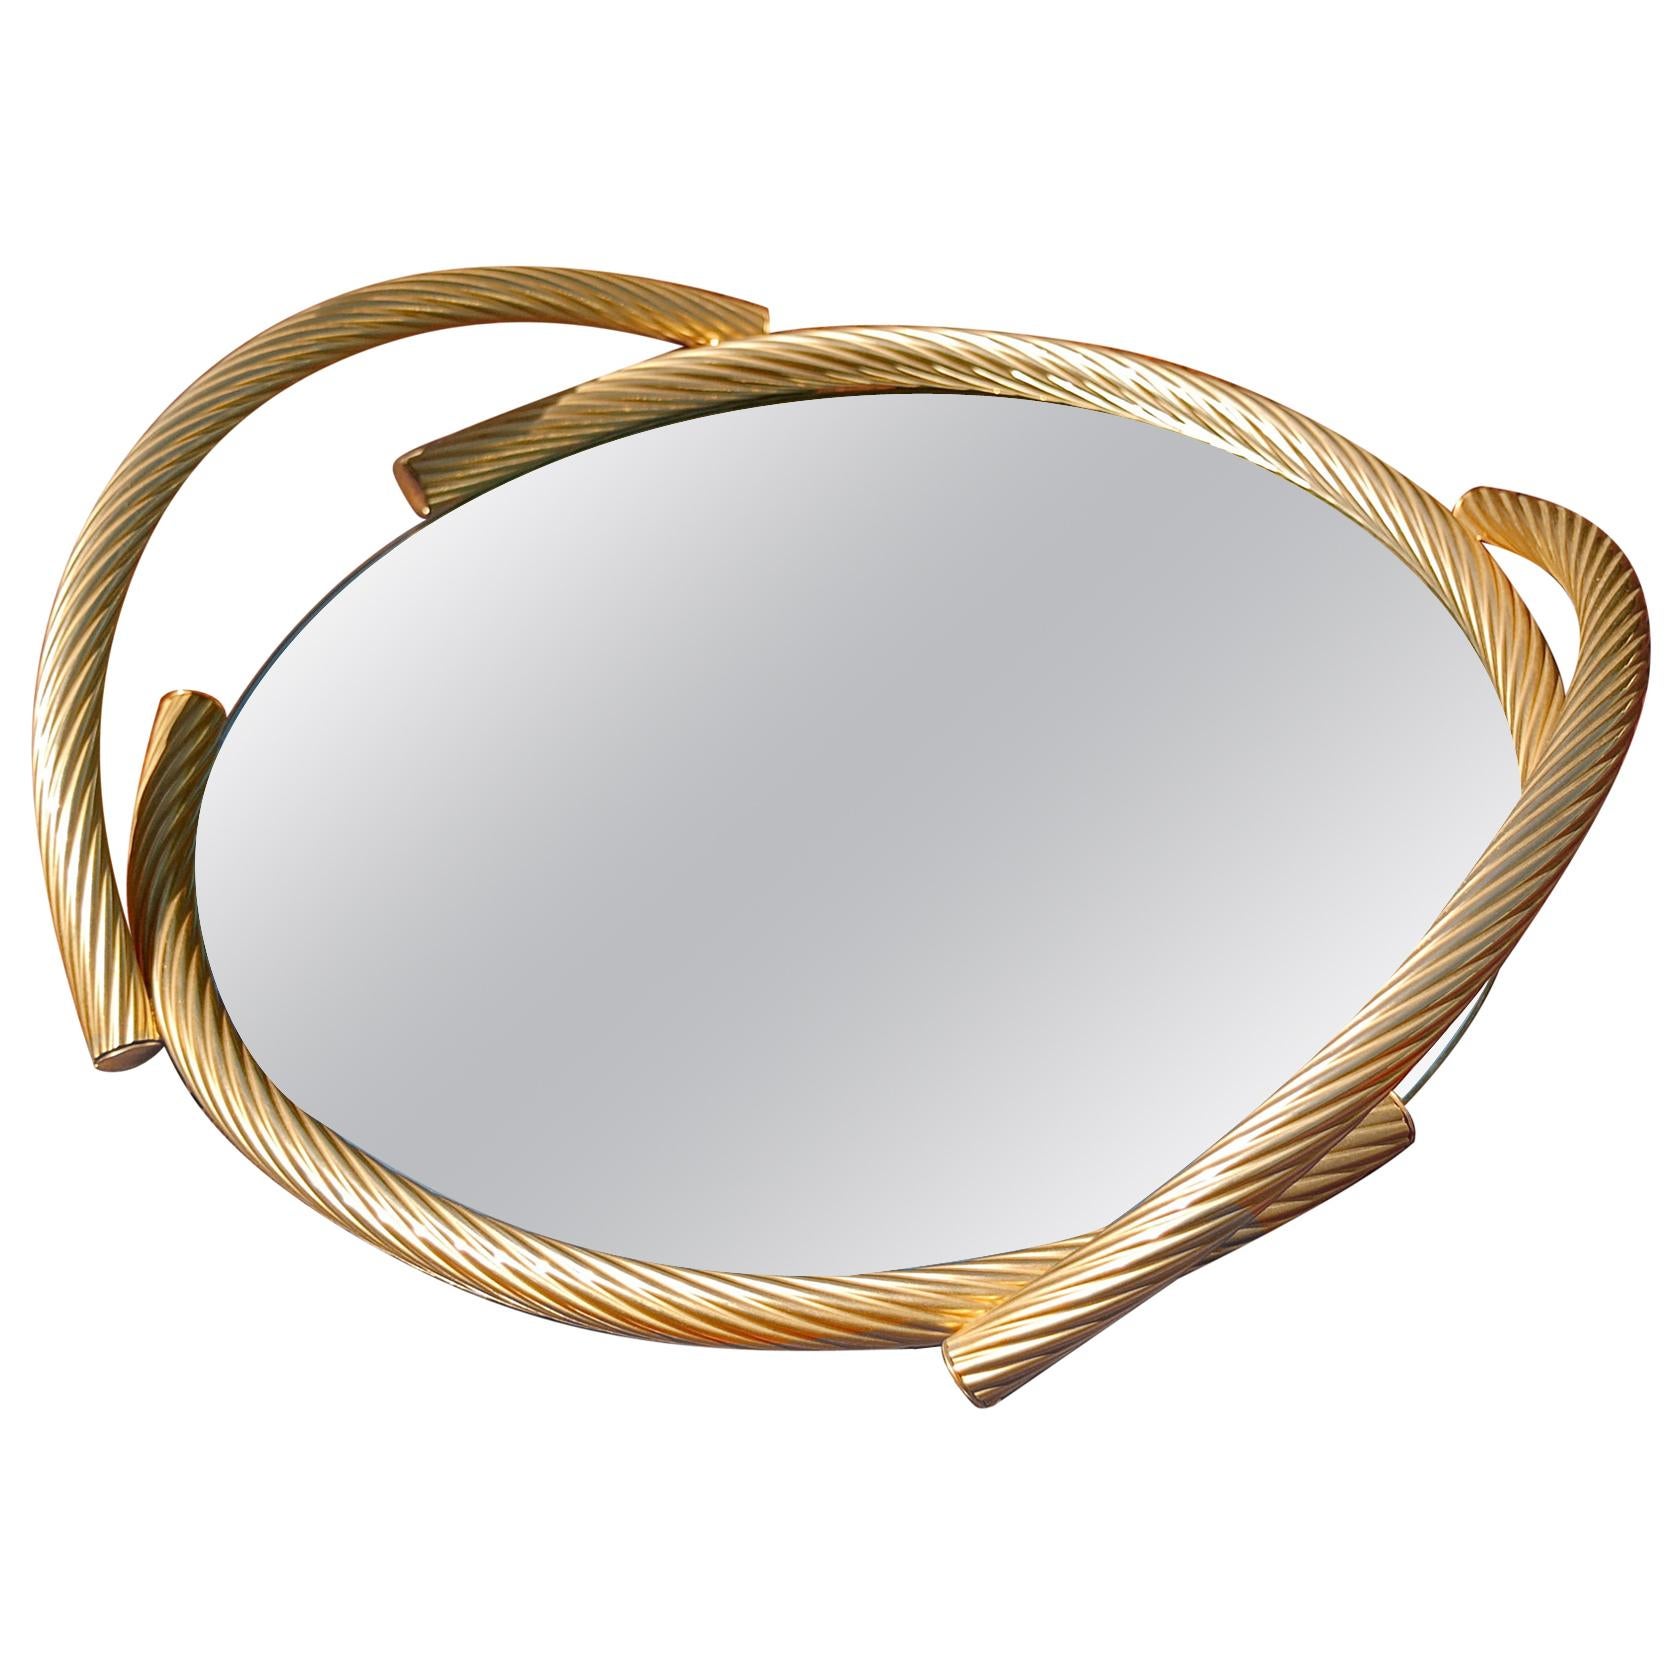 Gold Plated Circular Mirrored Tray By Dimart Milano Italy, 1980s For Sale